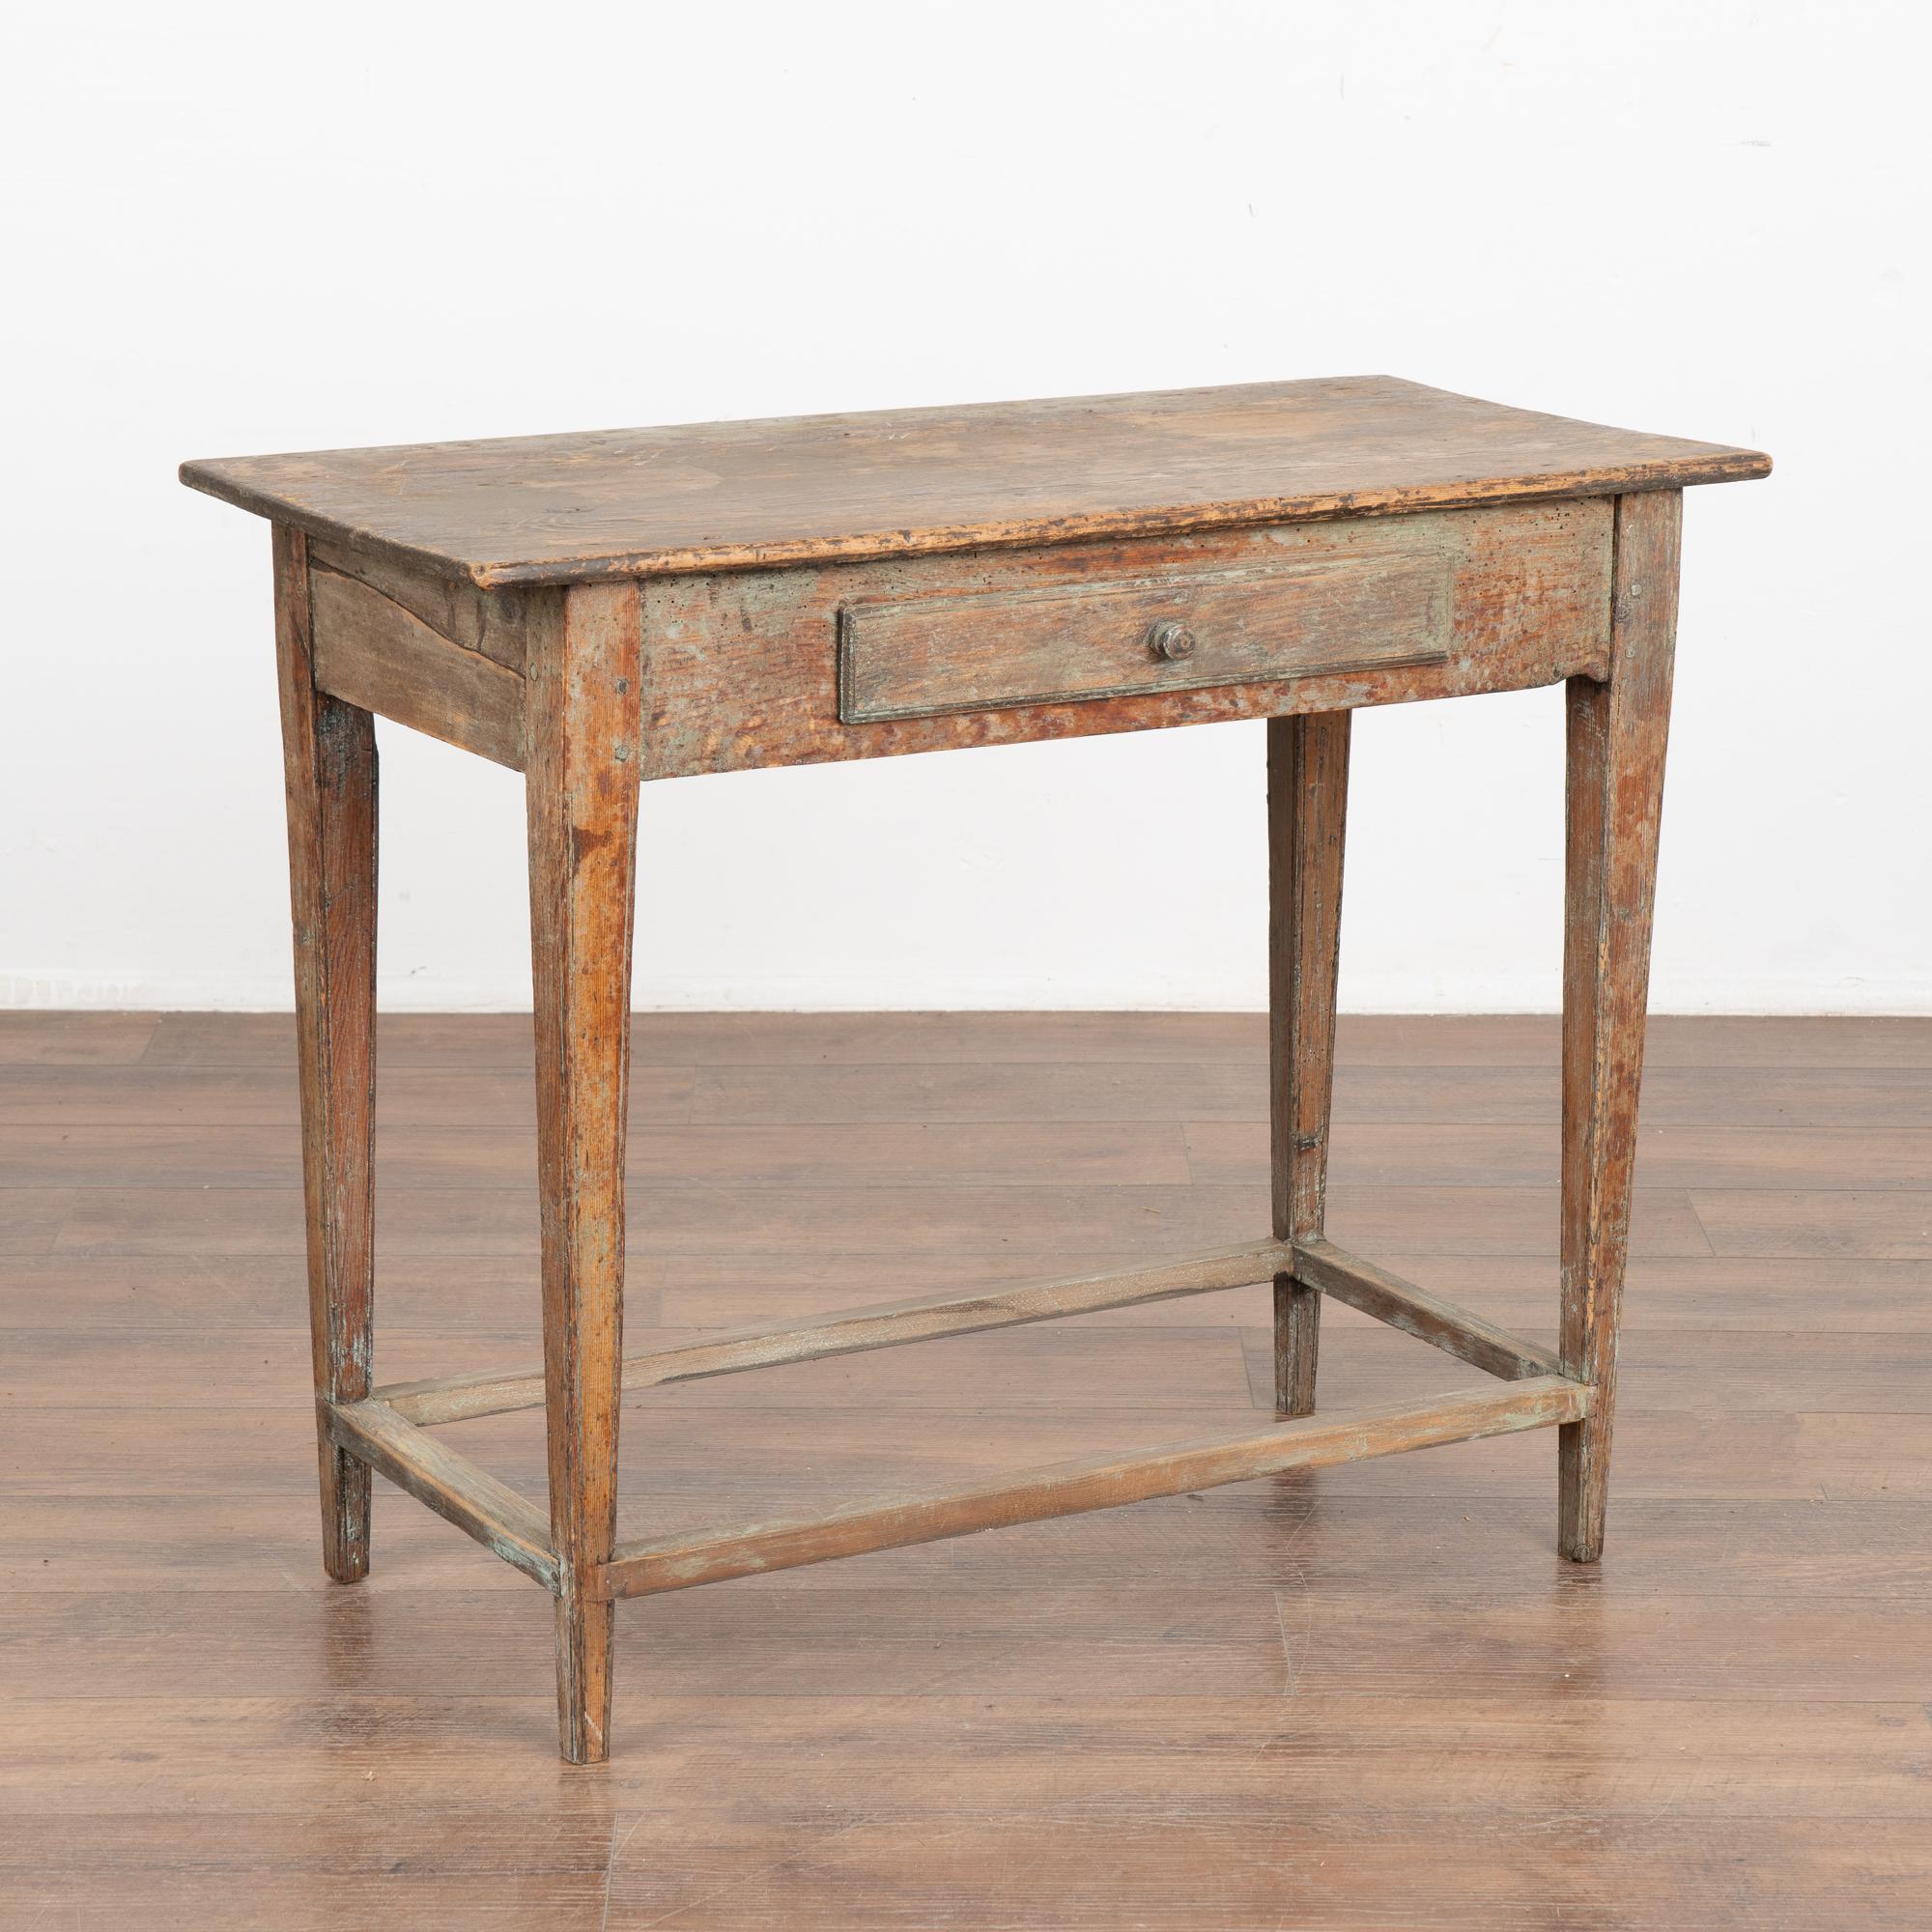 Swedish country original painted pine side table with traditional tapered legs and single drawer. 
The original paint has been worn down to the warm pine patina below. Faint remains of blue/green/teal paint are visible along with the scratches,